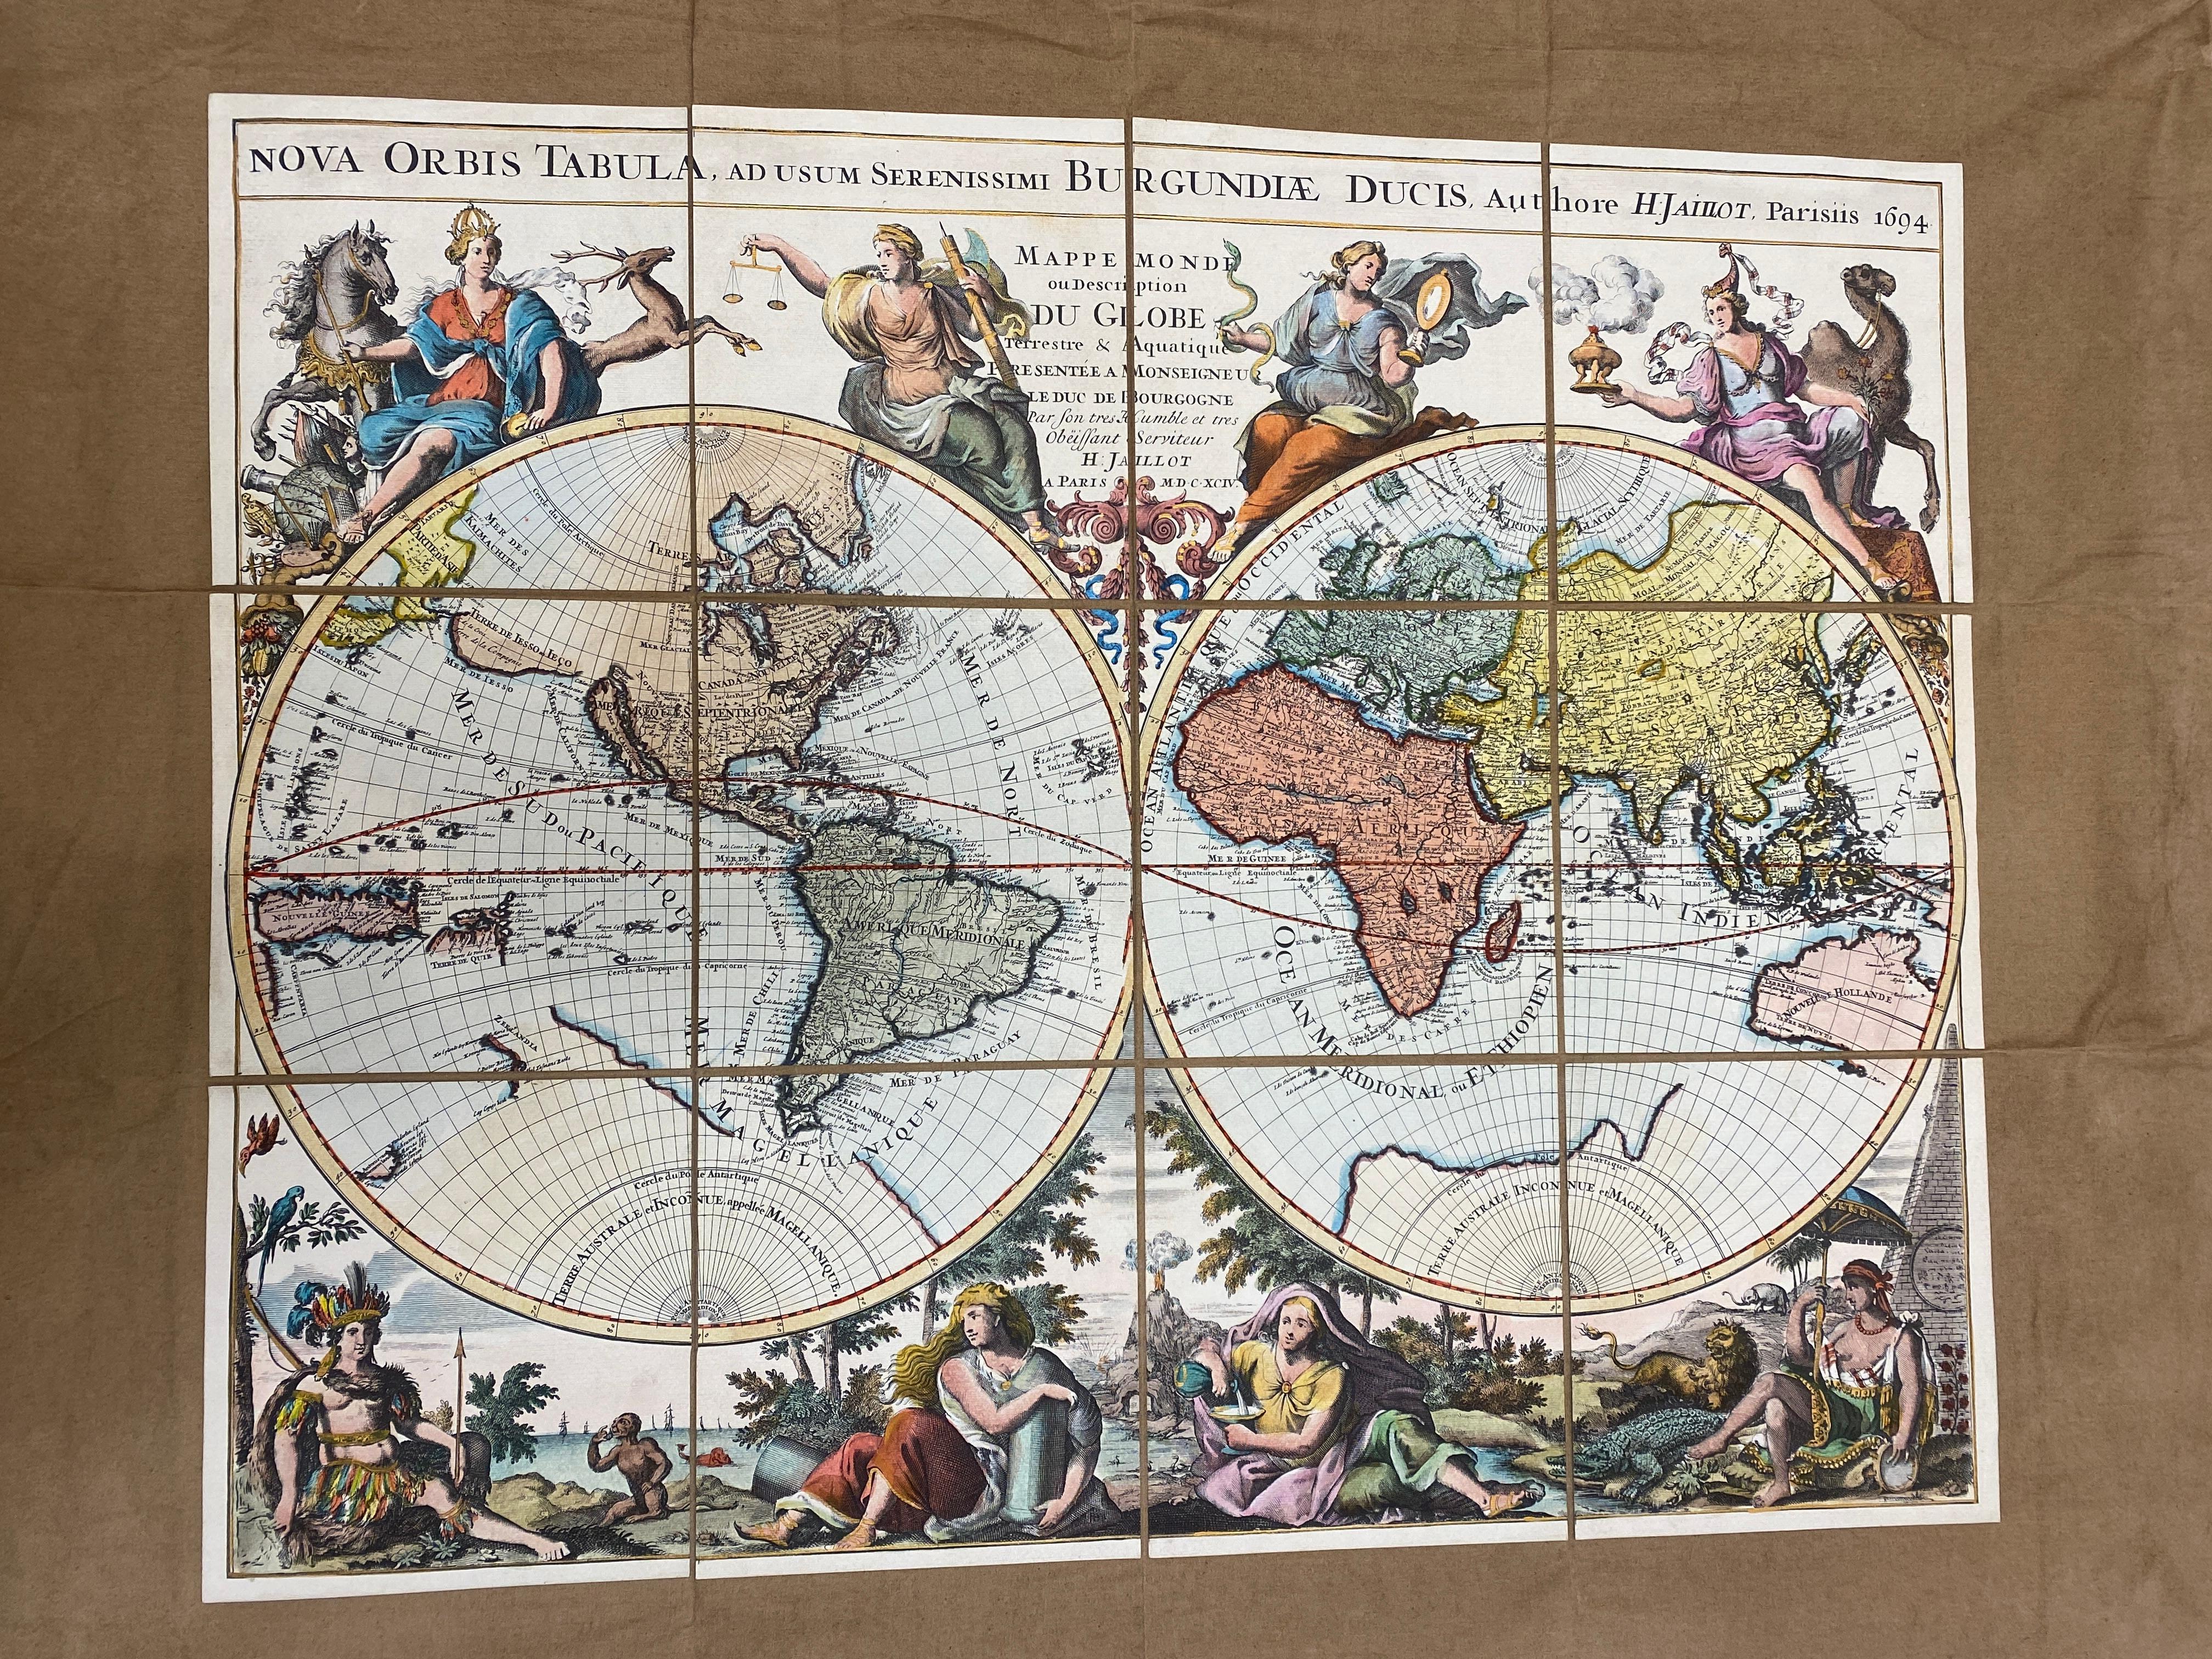 Beautiful reproduction of an antique French map showing the globe divided into the two hemispheres, made in Paris nl 1694 by H. Jaillot. 

Internal measure: 85 x 68.5 cm

The technique of applying the print on a cotton canvas dates back to the